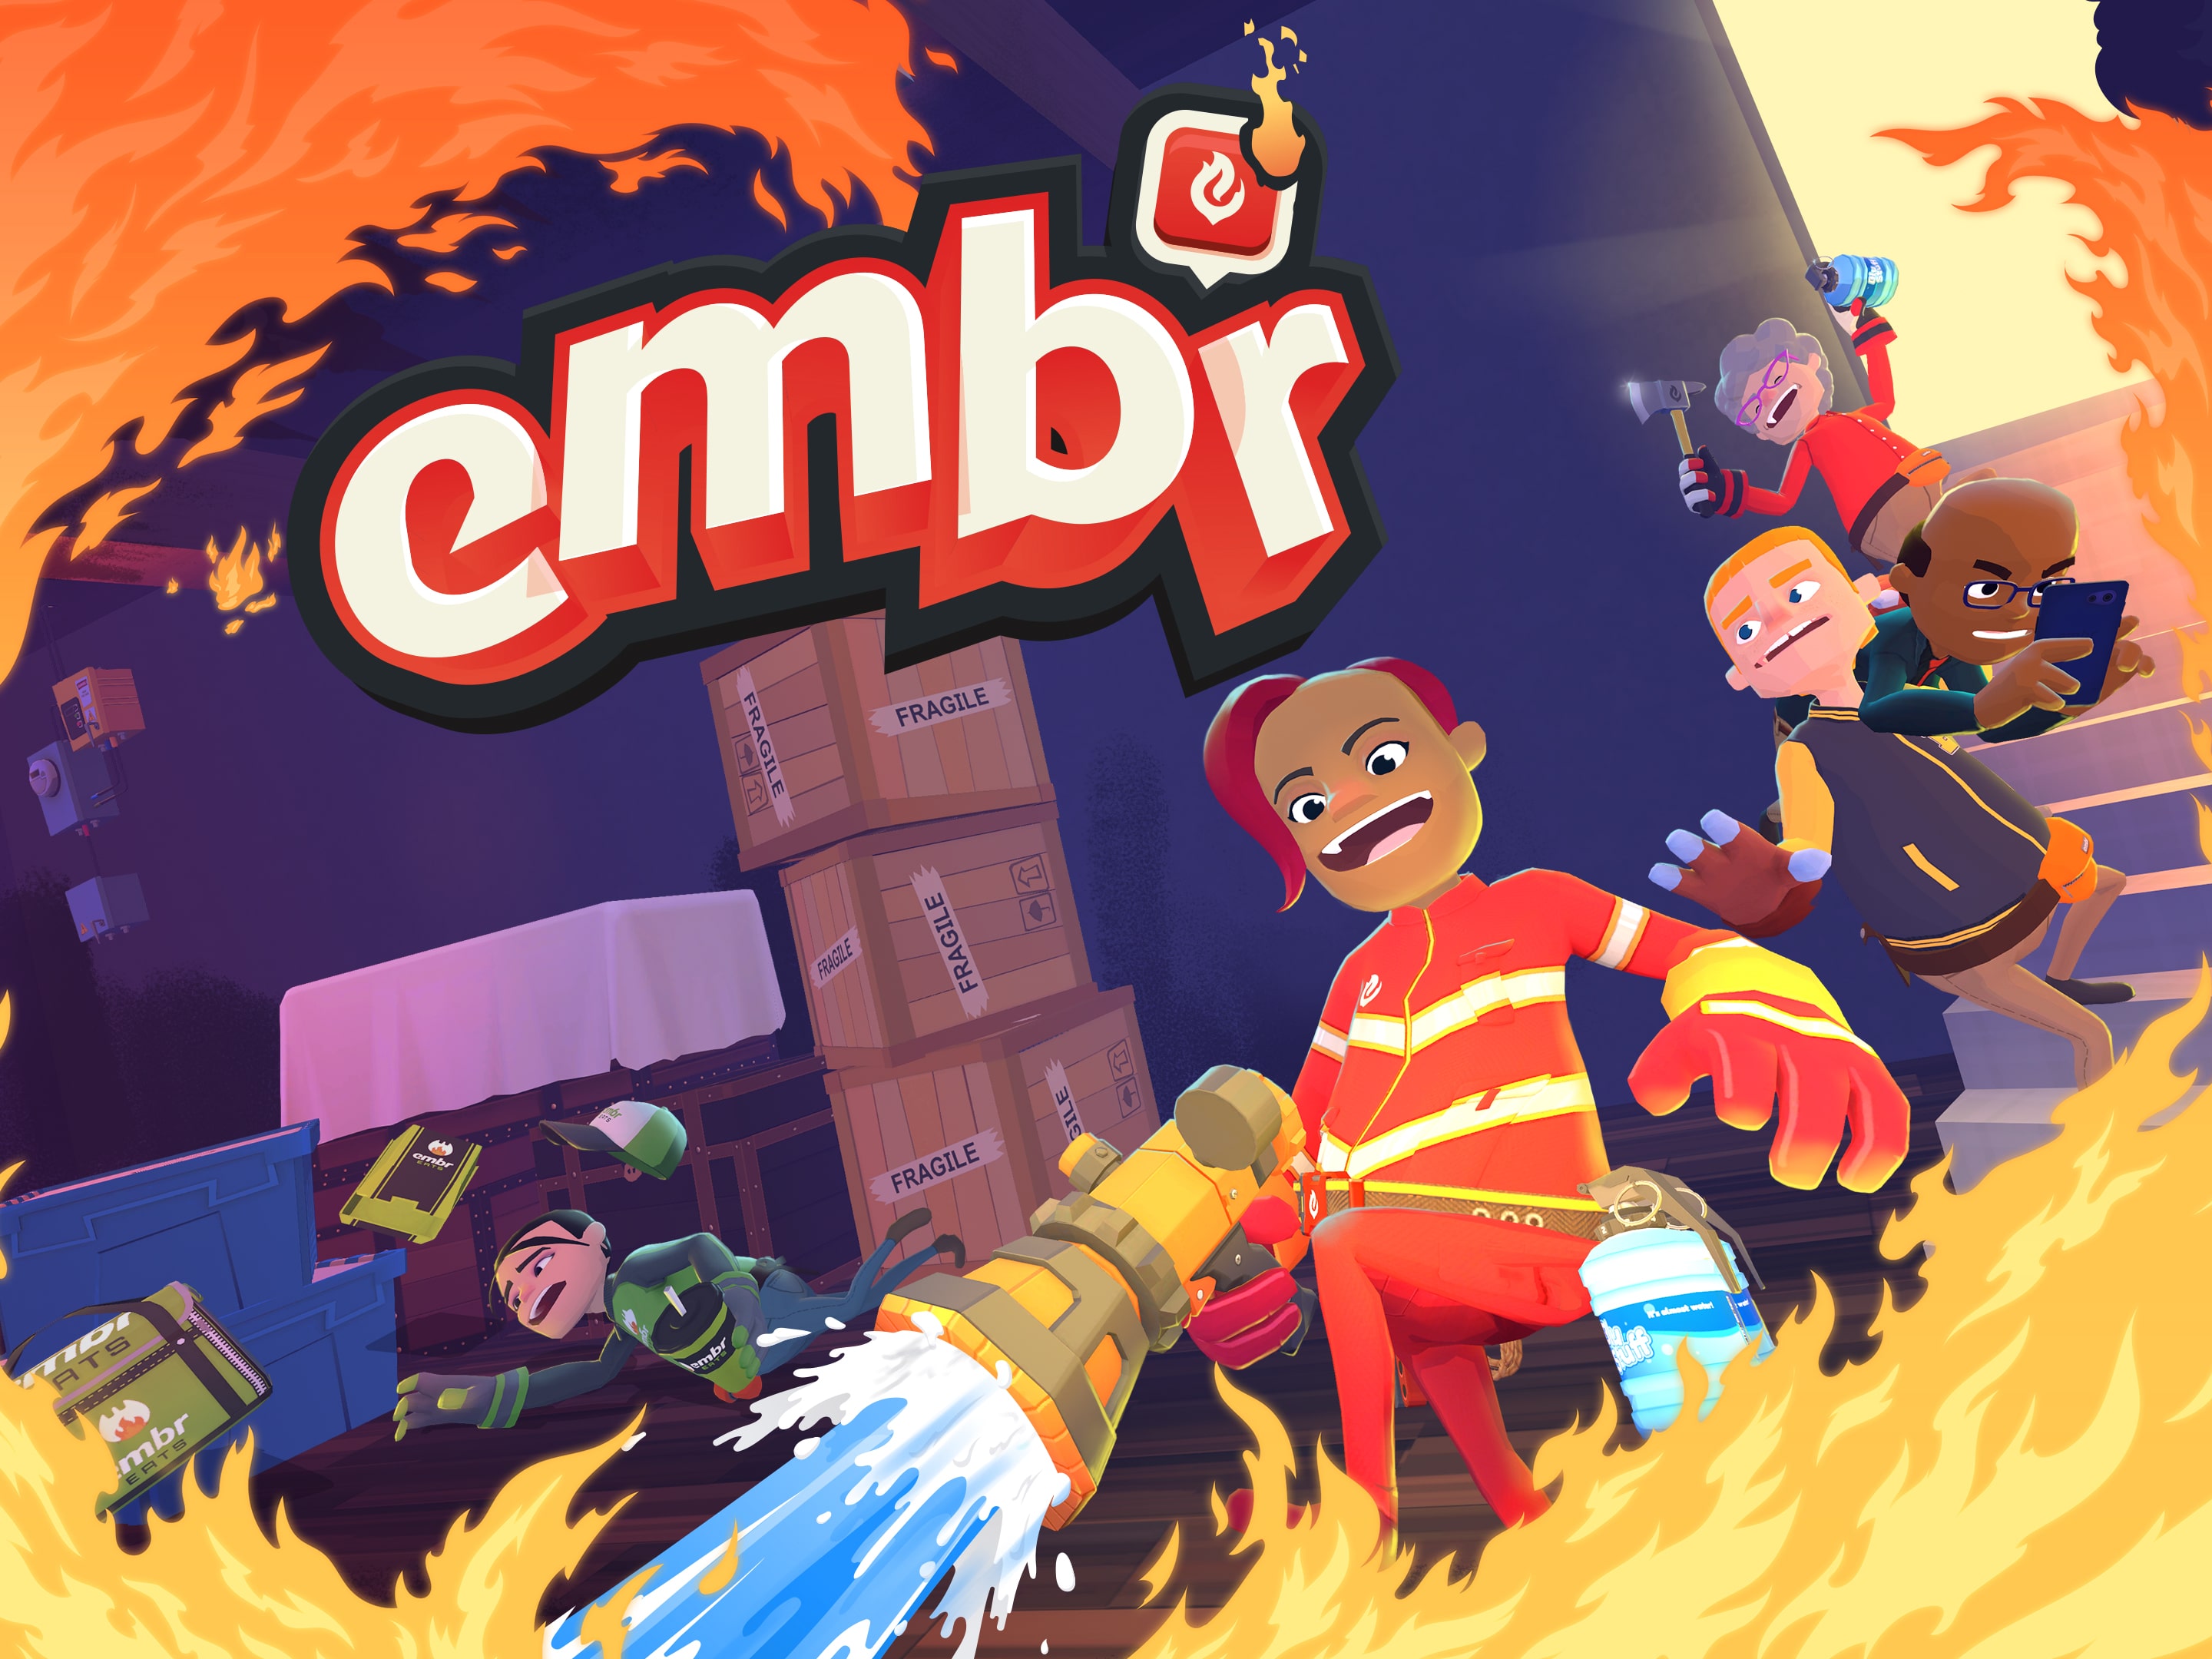 Play firefighters for hire in frantic multiplayer Embr, out tomorrow –  PlayStation.Blog